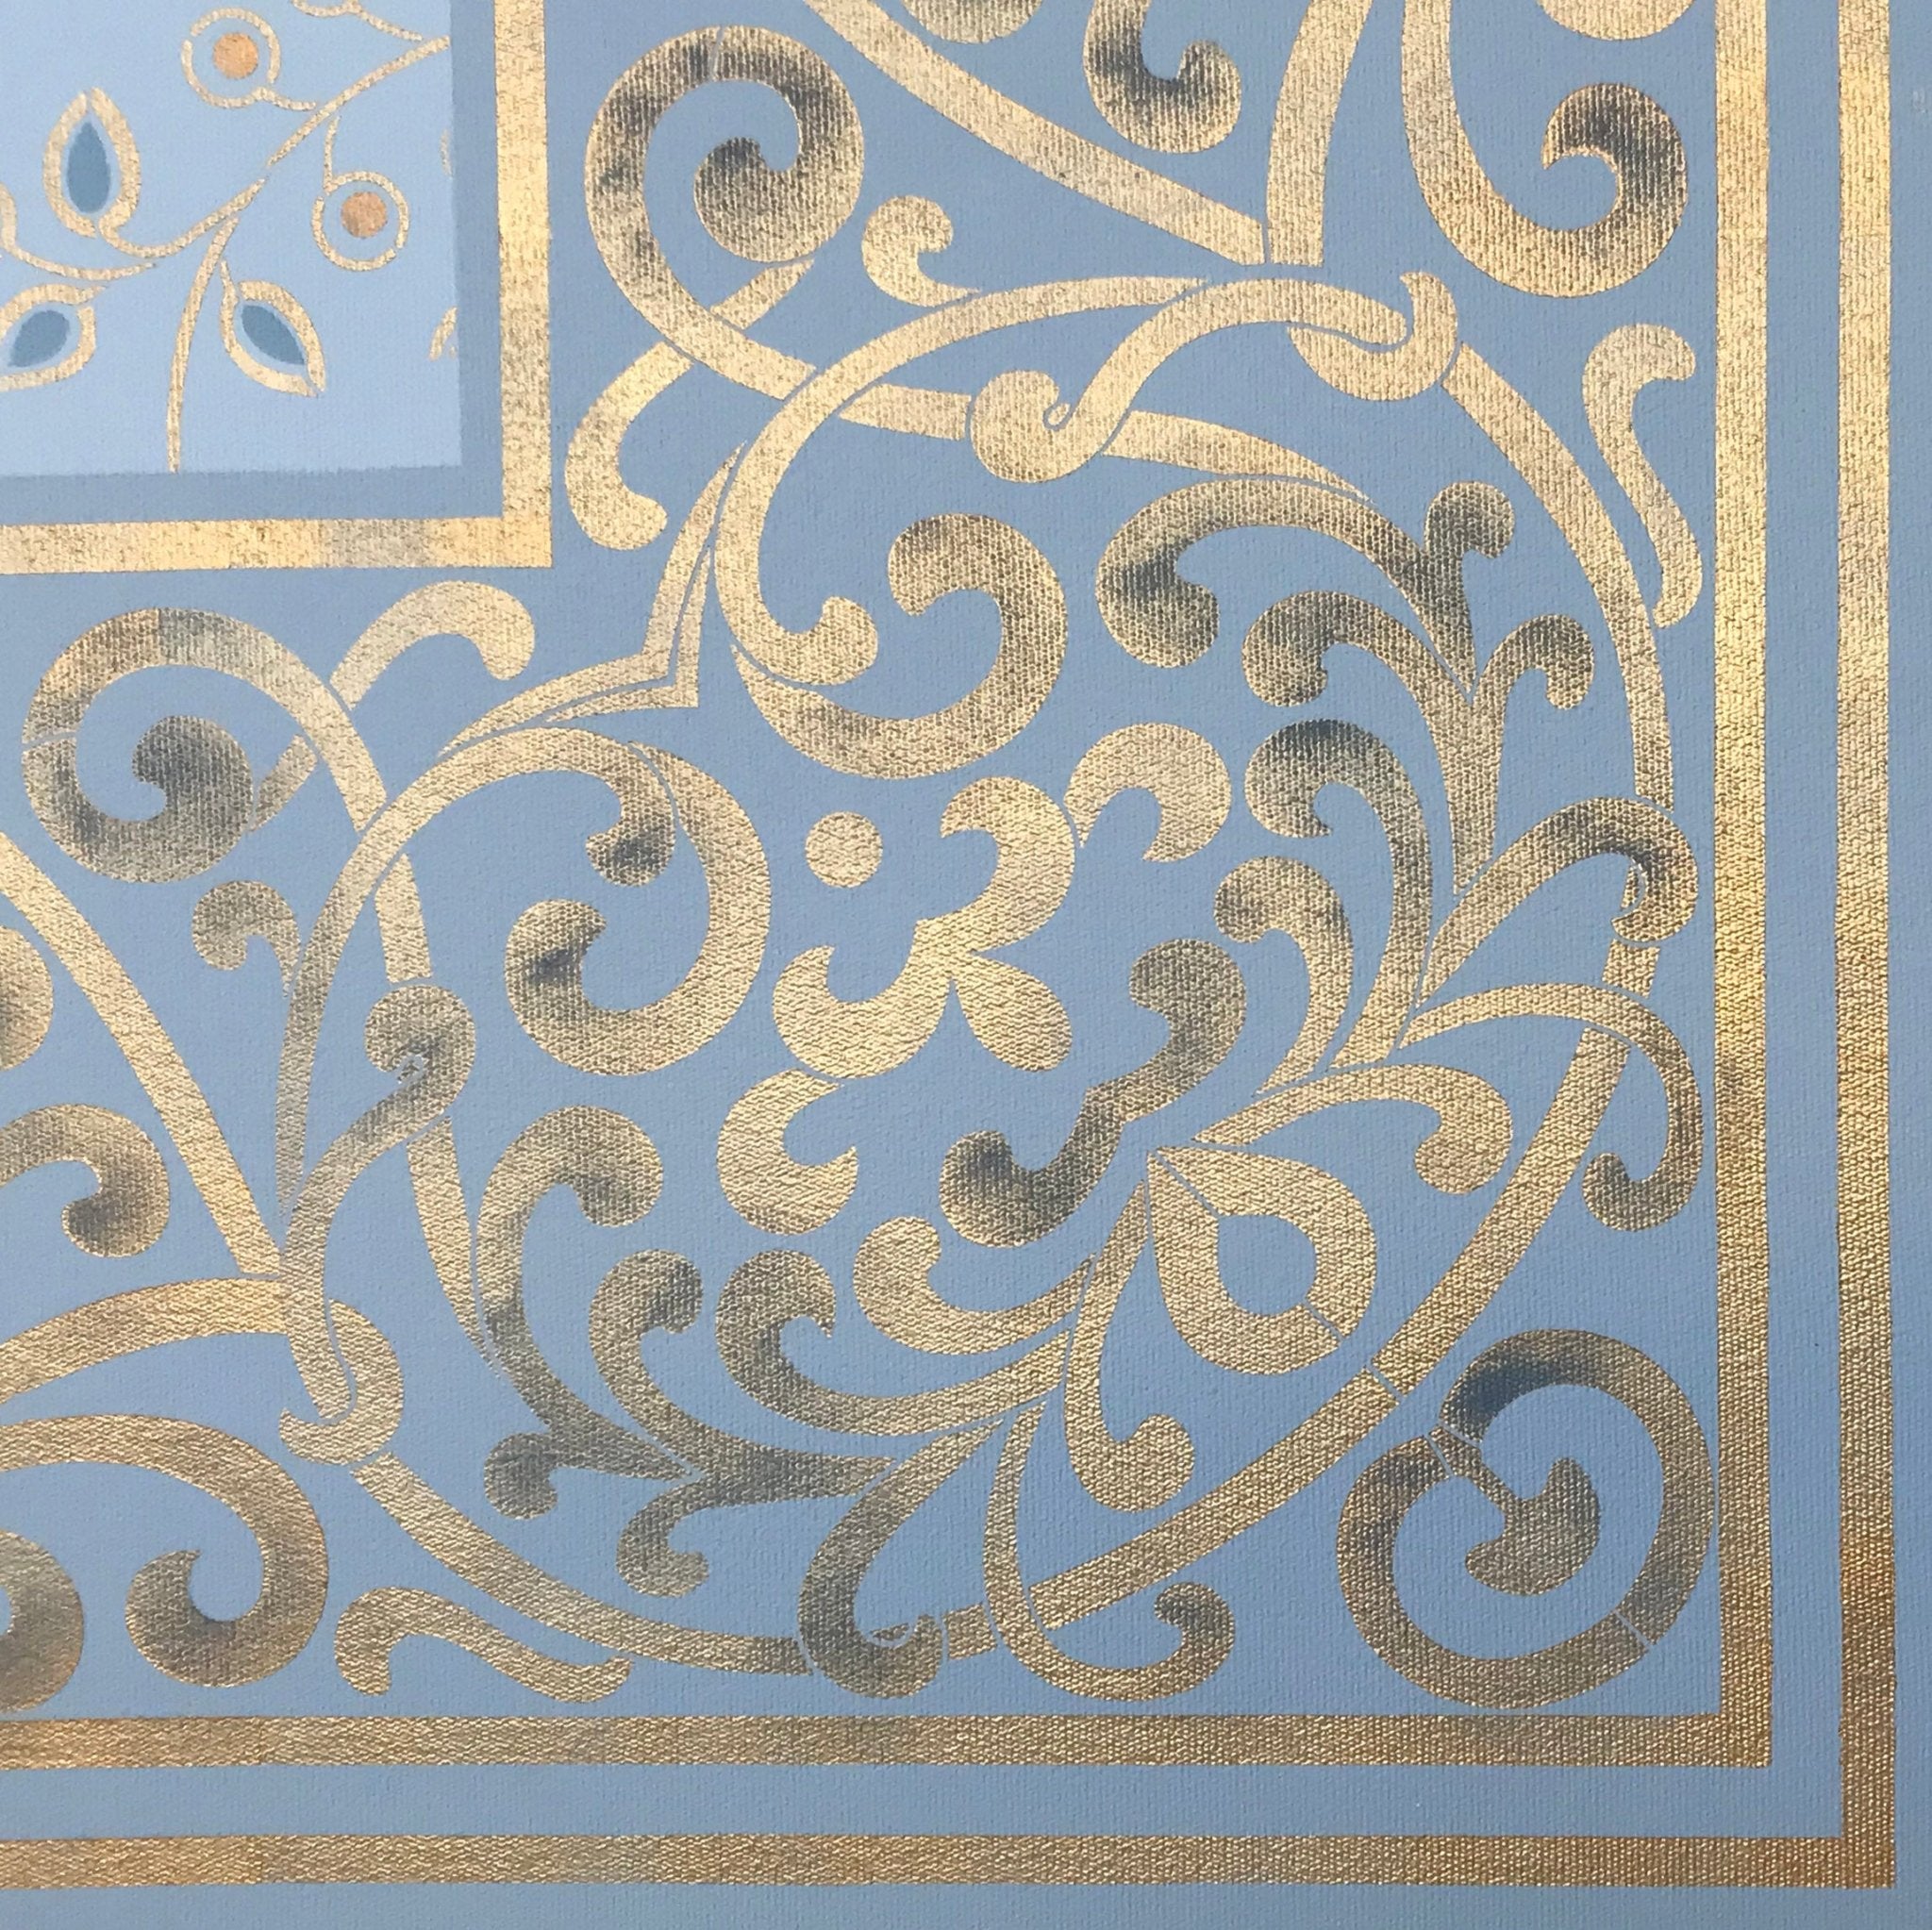 A close up of the corner of this floorcloth based on Robert Graves Co. wallpaper patterns c. 1800s.